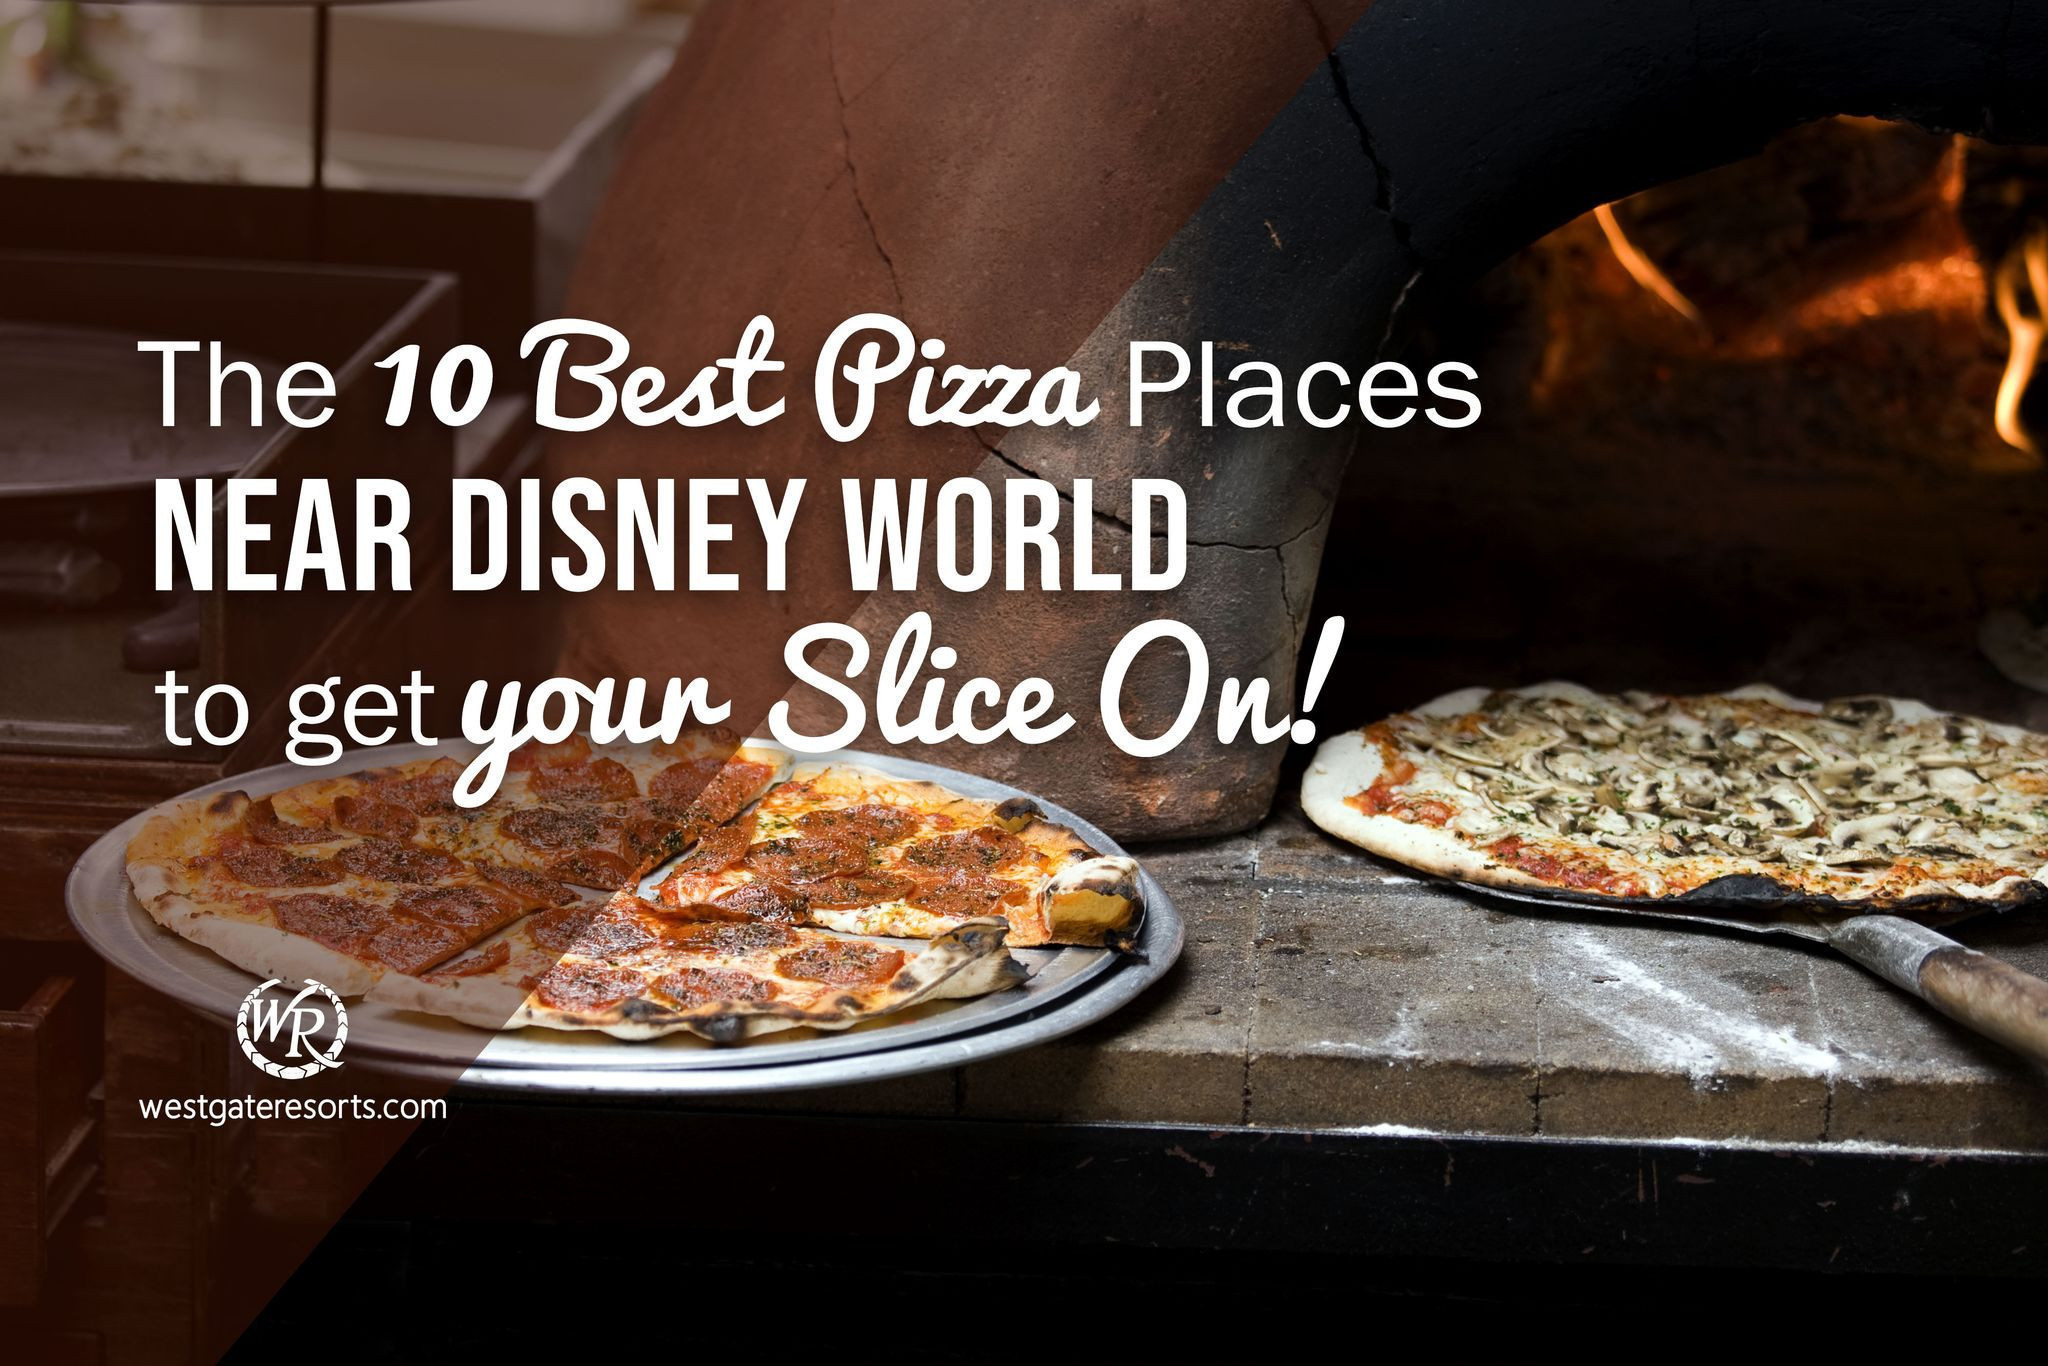 The 10 Best Pizza Places in Orlando Near Disney!